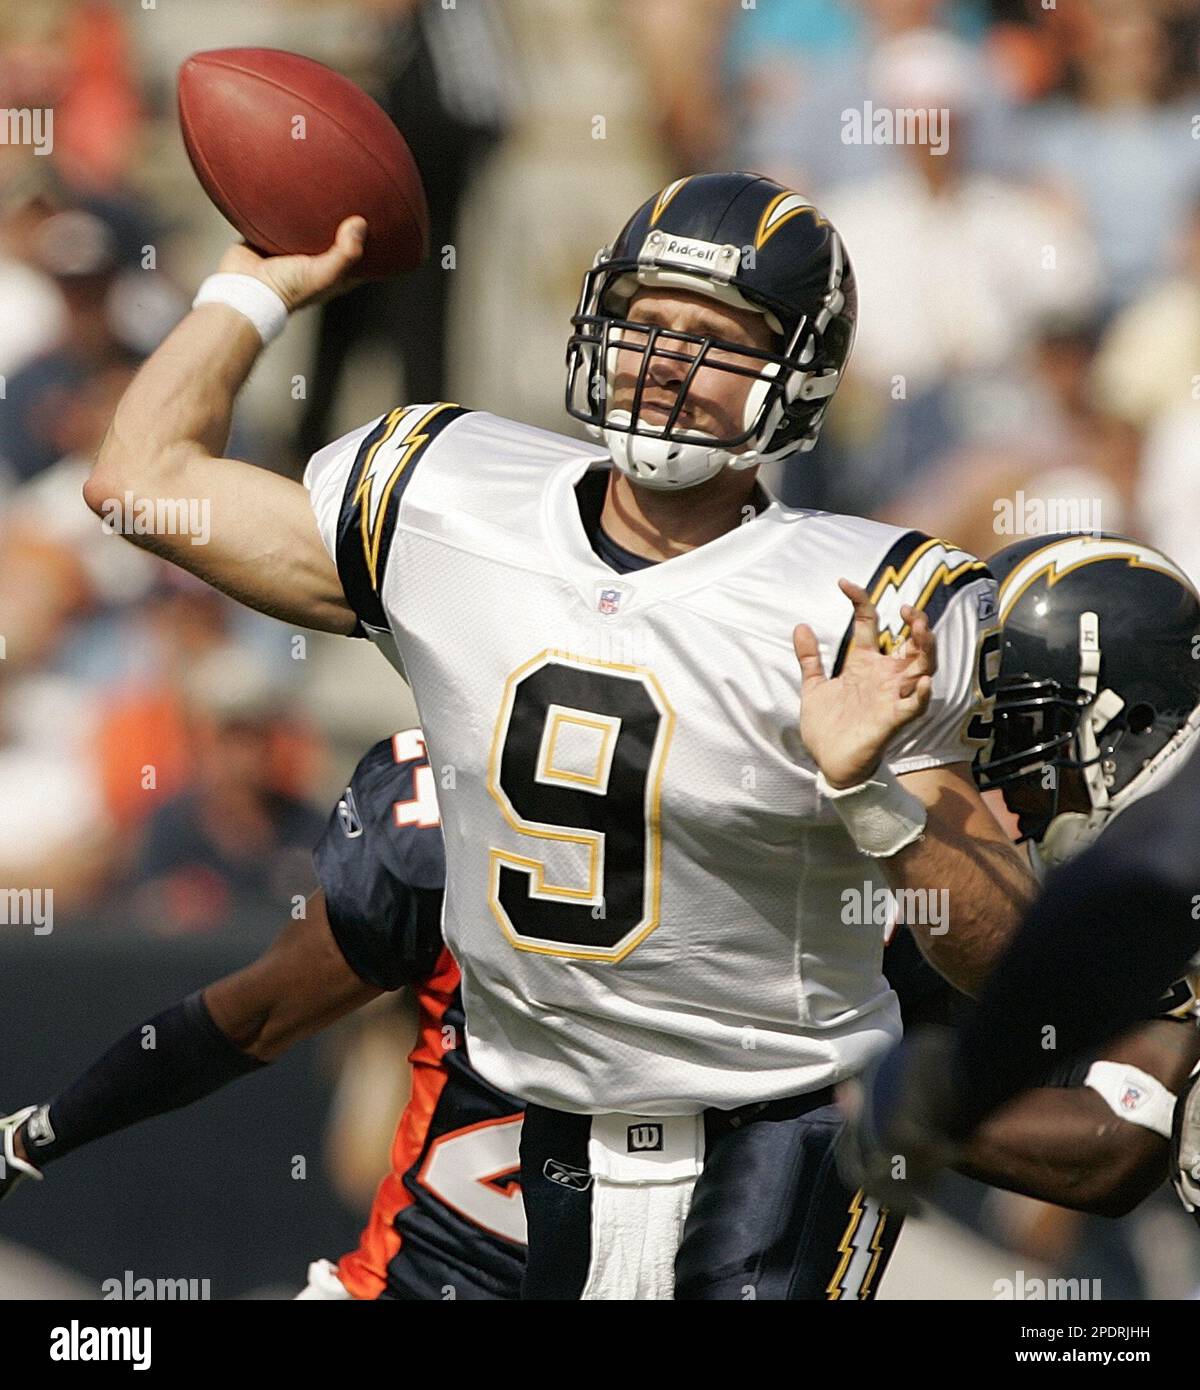 San Diego Chargers quarterback Drew Brees sets to fire a pass against ...